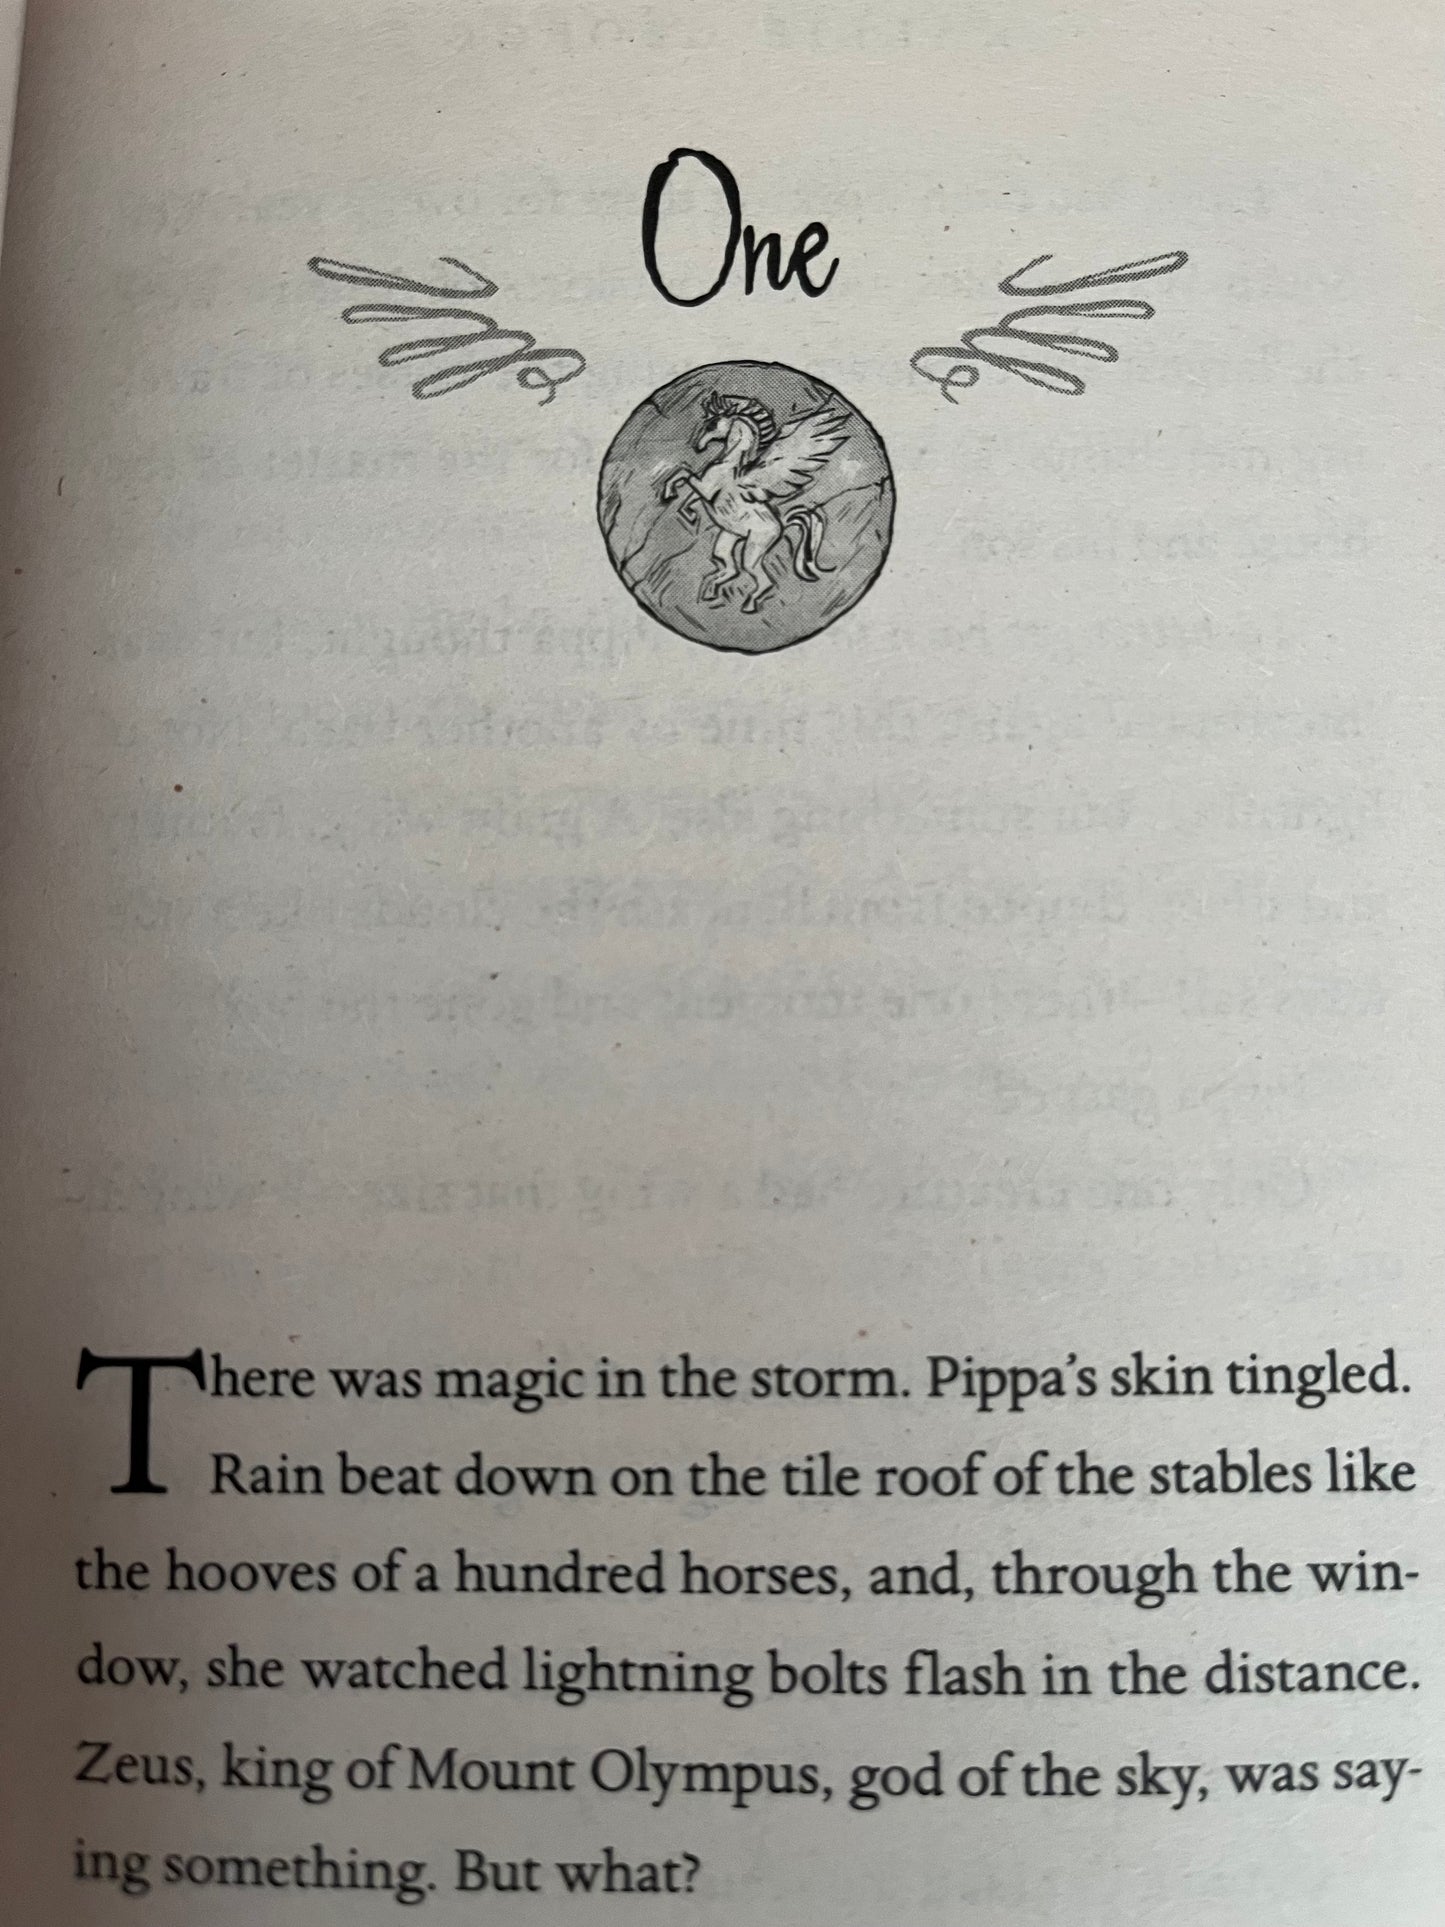 Chapter Books for Older Readers - WINGS OF OLYMPUS, Book One